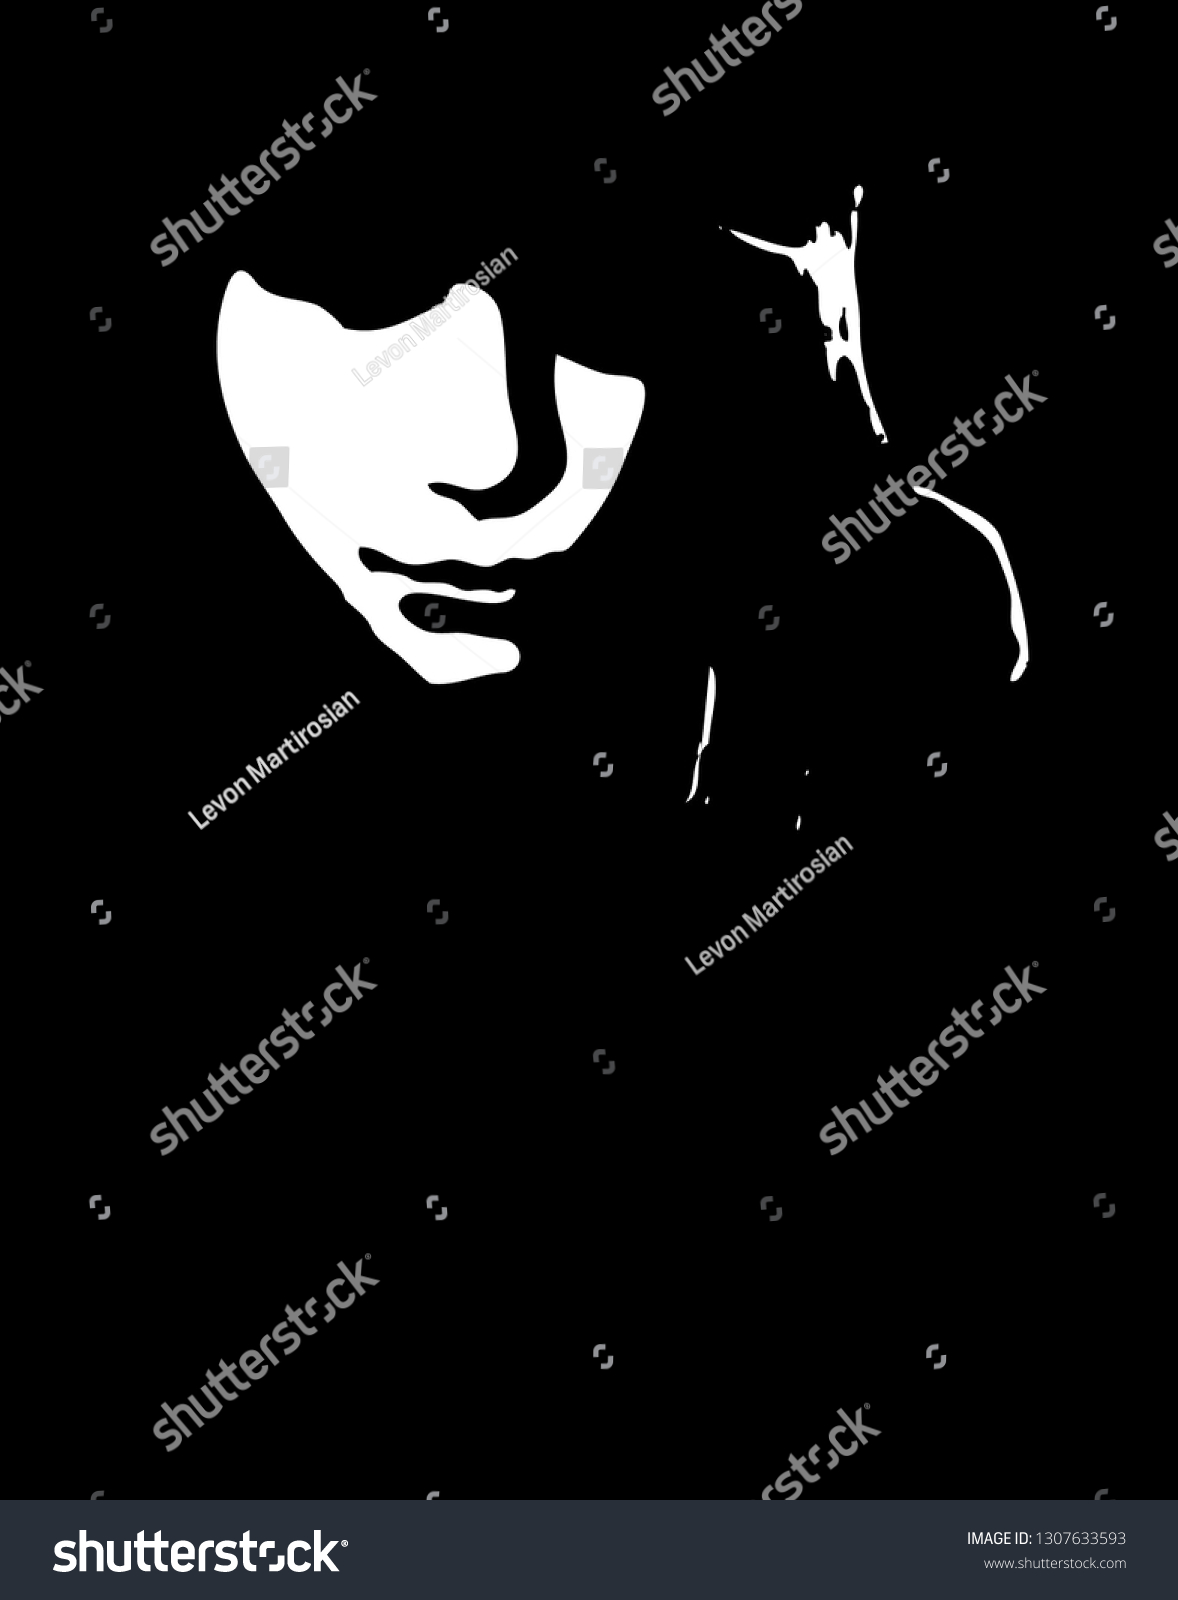 Sexy Young Woman Graffiti Stencil Face Stock Vector Royalty Free 1307633593 Shutterstock 6897